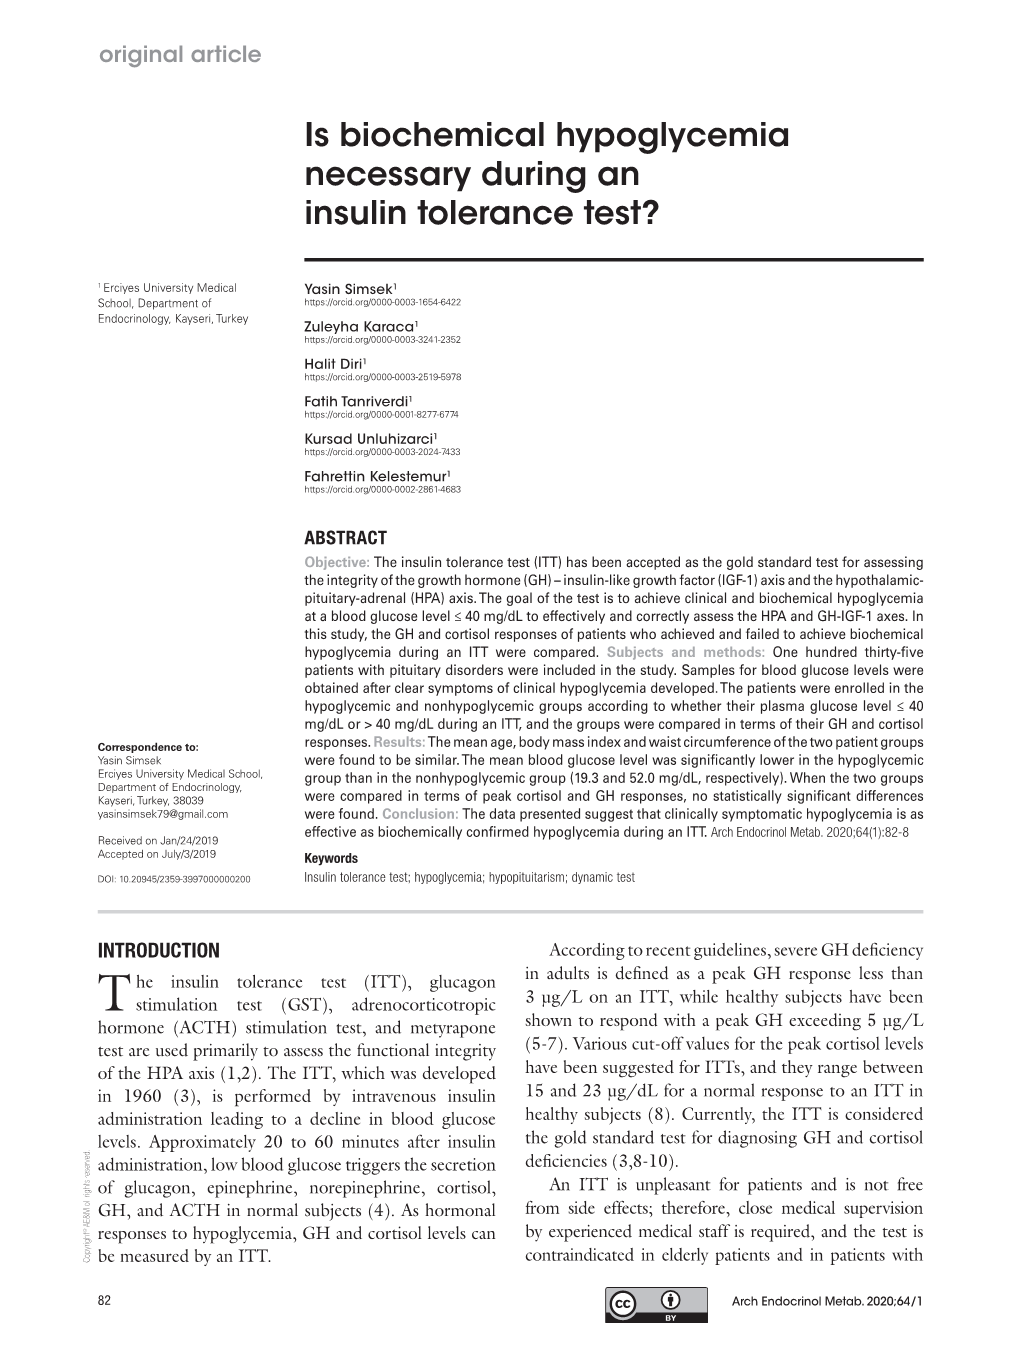 Is Biochemical Hypoglycemia Necessary During an Insulin Tolerance Test?